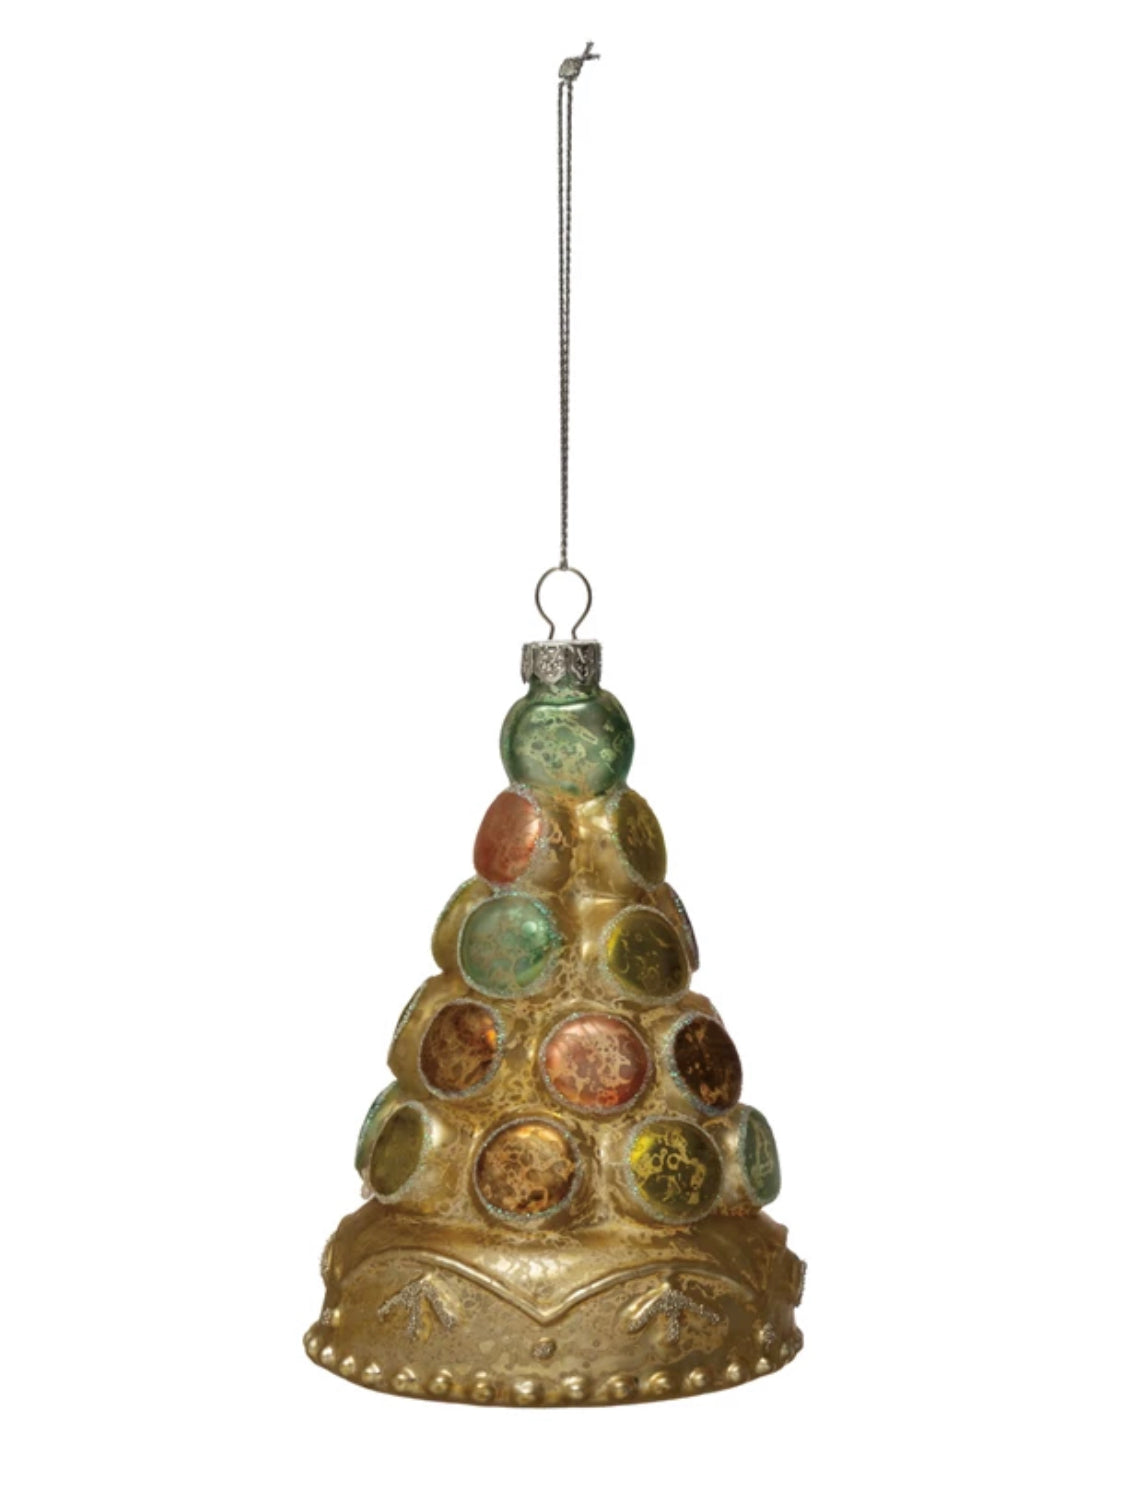 Hand-Painted Glass Macaron Tower Ornament, Multi Color